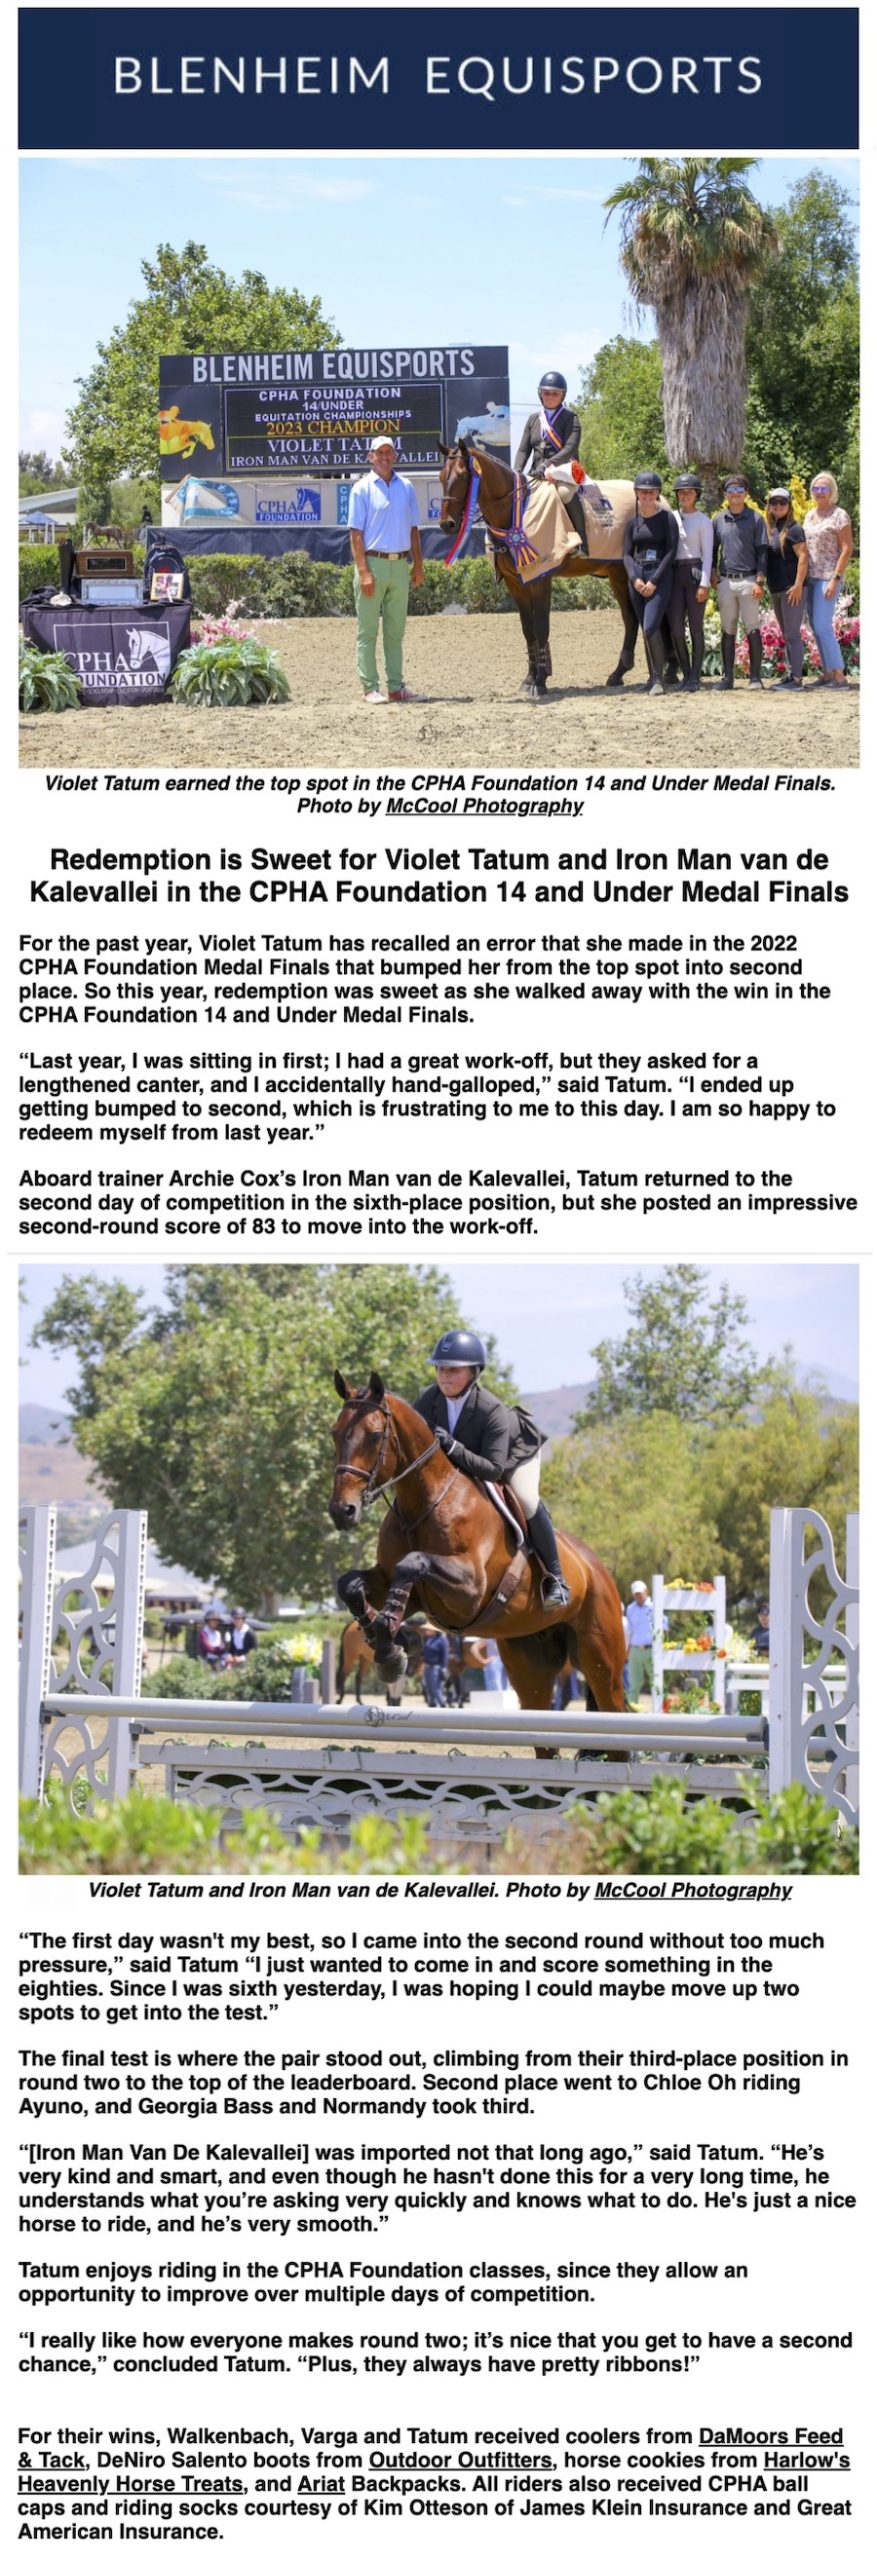 Redemption is Sweet for Violet Tatum and Iron Man van de Kalevallei in the CPHA Foundation 14 & Under Medal Finals 2023 Blenheim Press Release Photos by McCool